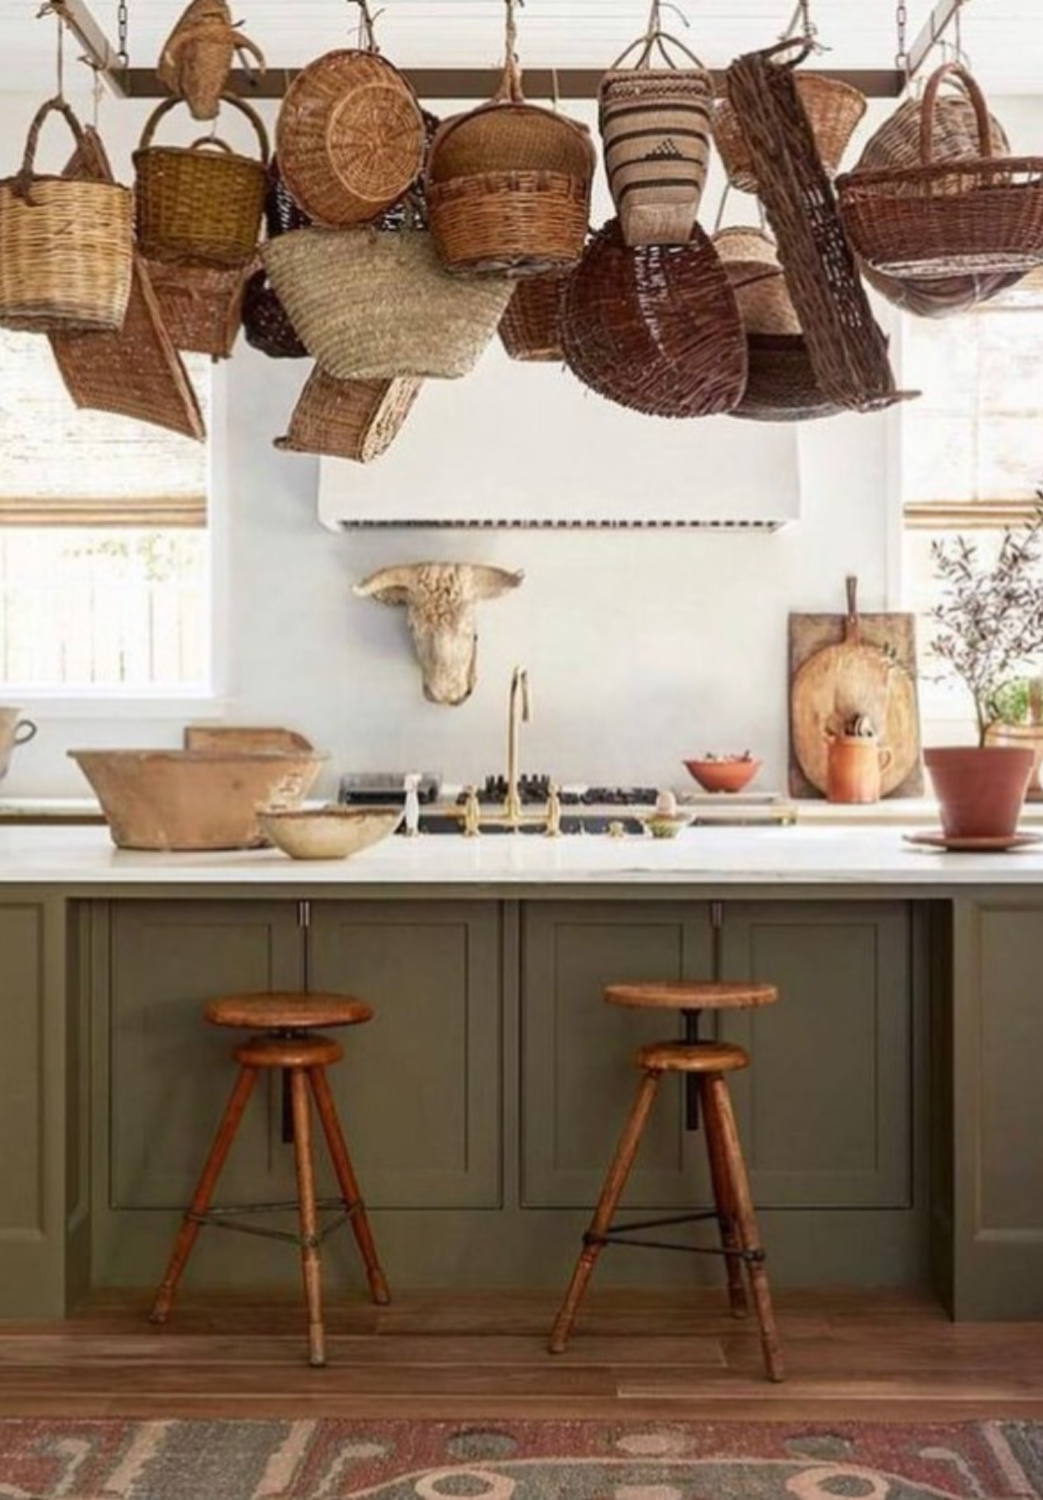 Olive green European country kitchen with antique baskets above island - Shannon Bowers Design (Photo: Laura Resen). #europeancountry #Frenchfarmhousekitchen #greenkitchens